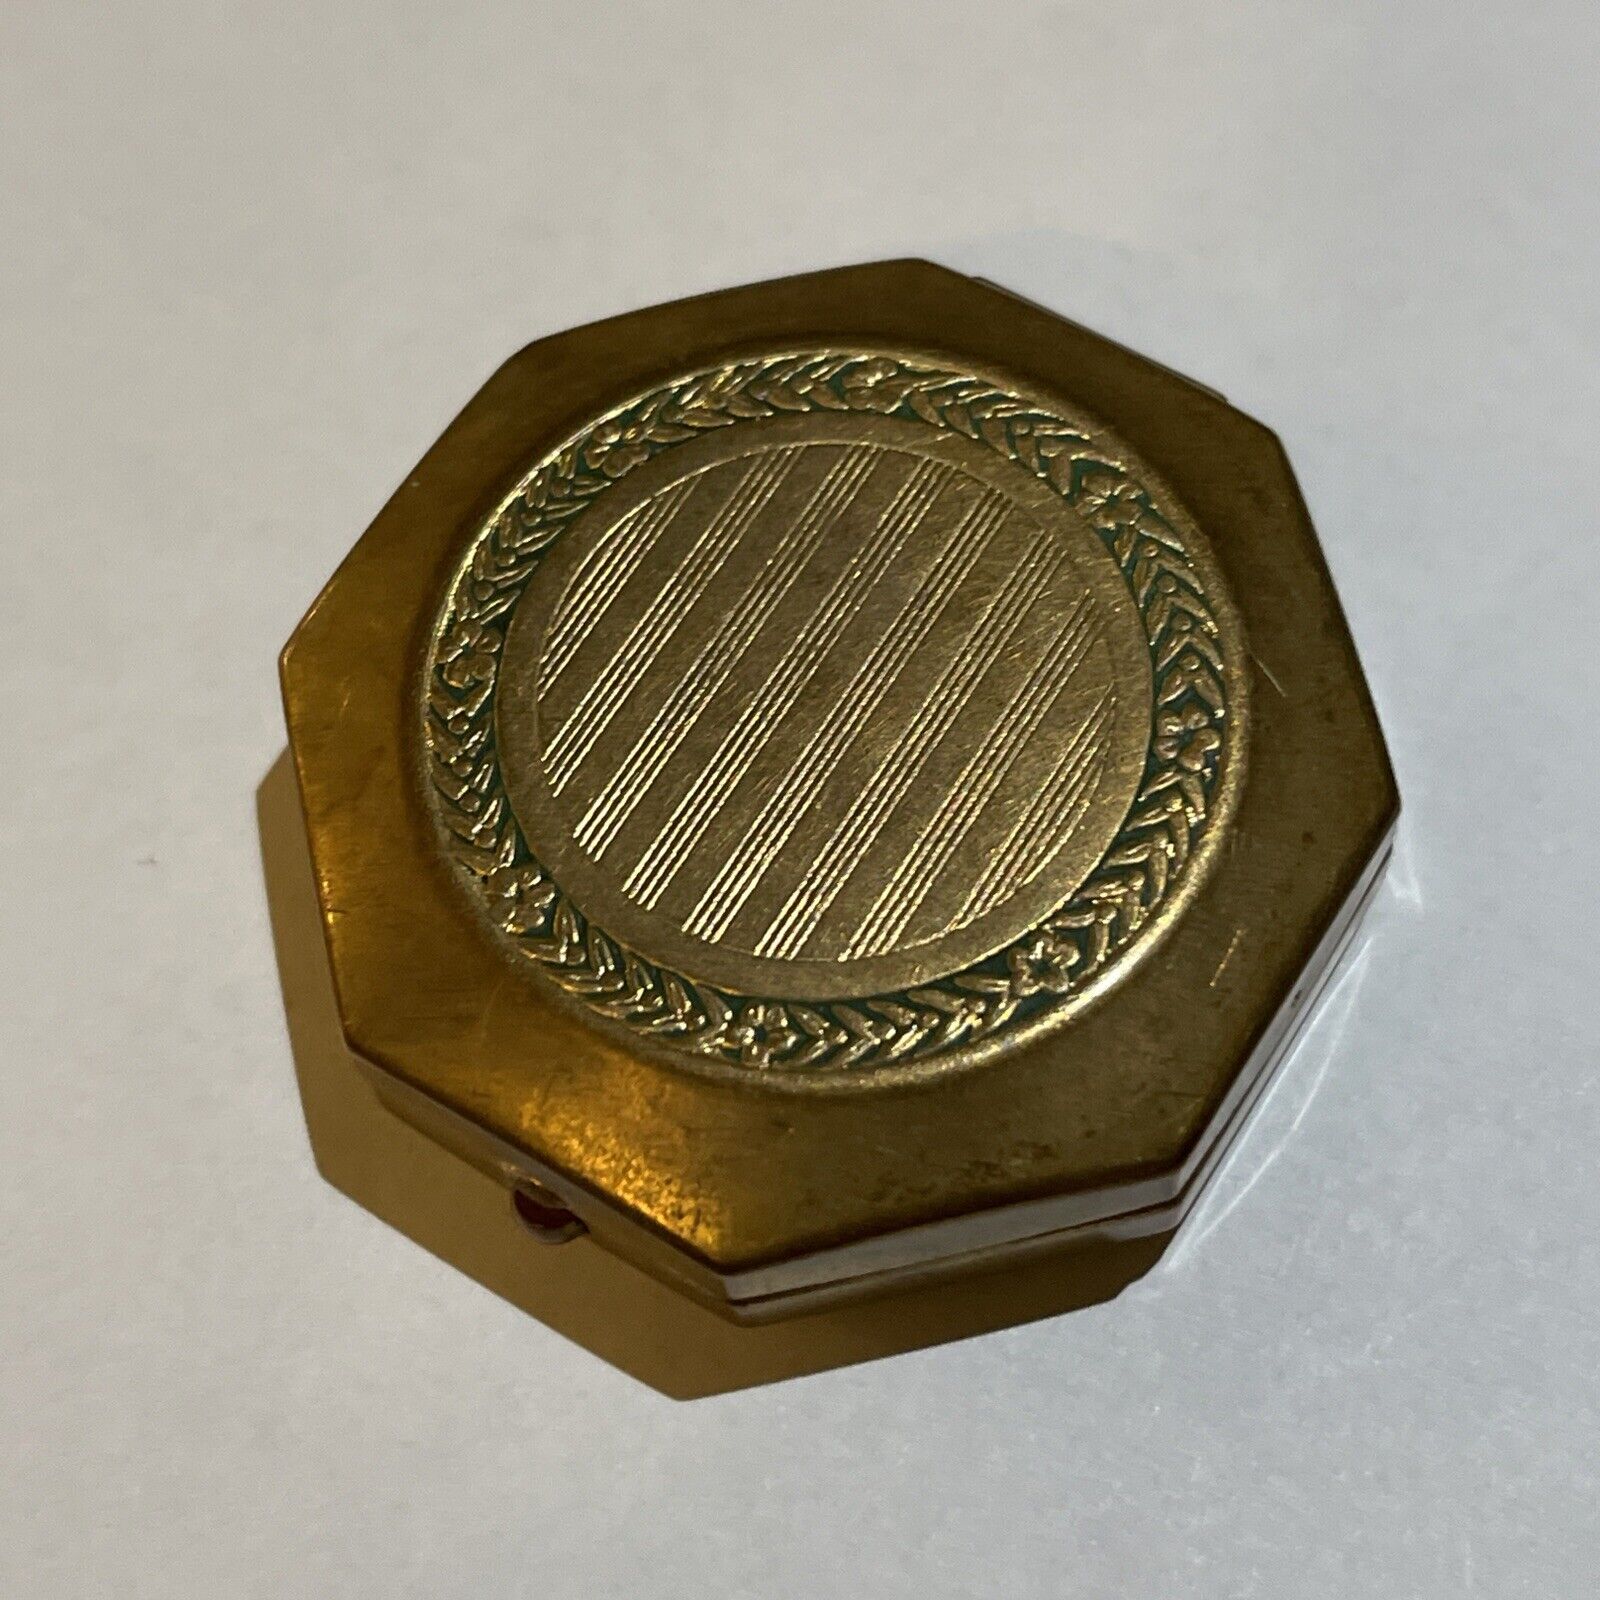 Vintage American Face Powder Compact - Djer-Kiss 1920s